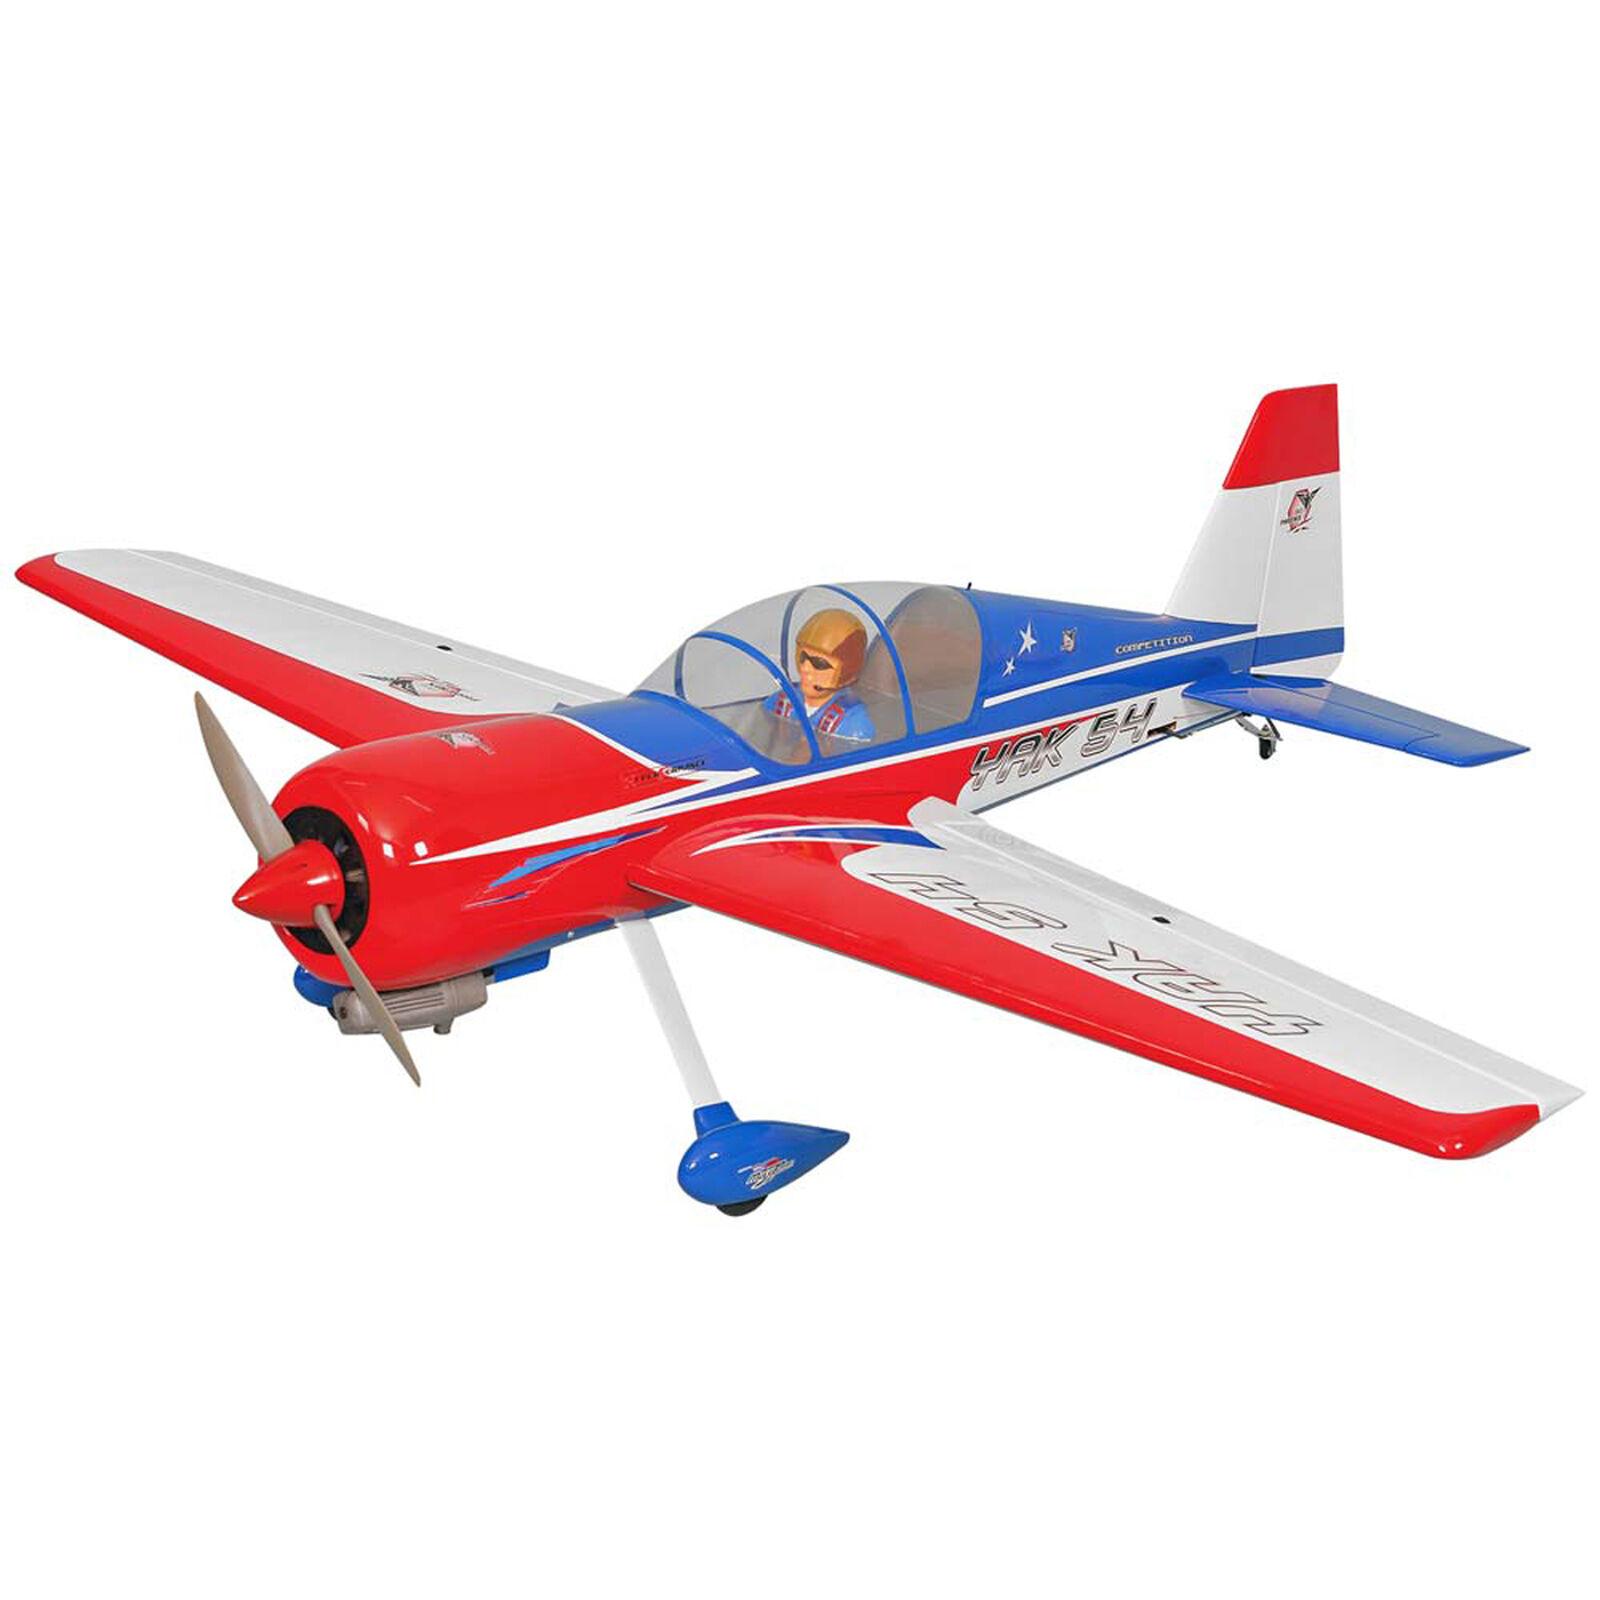 Yak 54 Rc Plane For Sale: Buying a YAK-54 RC Plane: Helpful Tips and Information